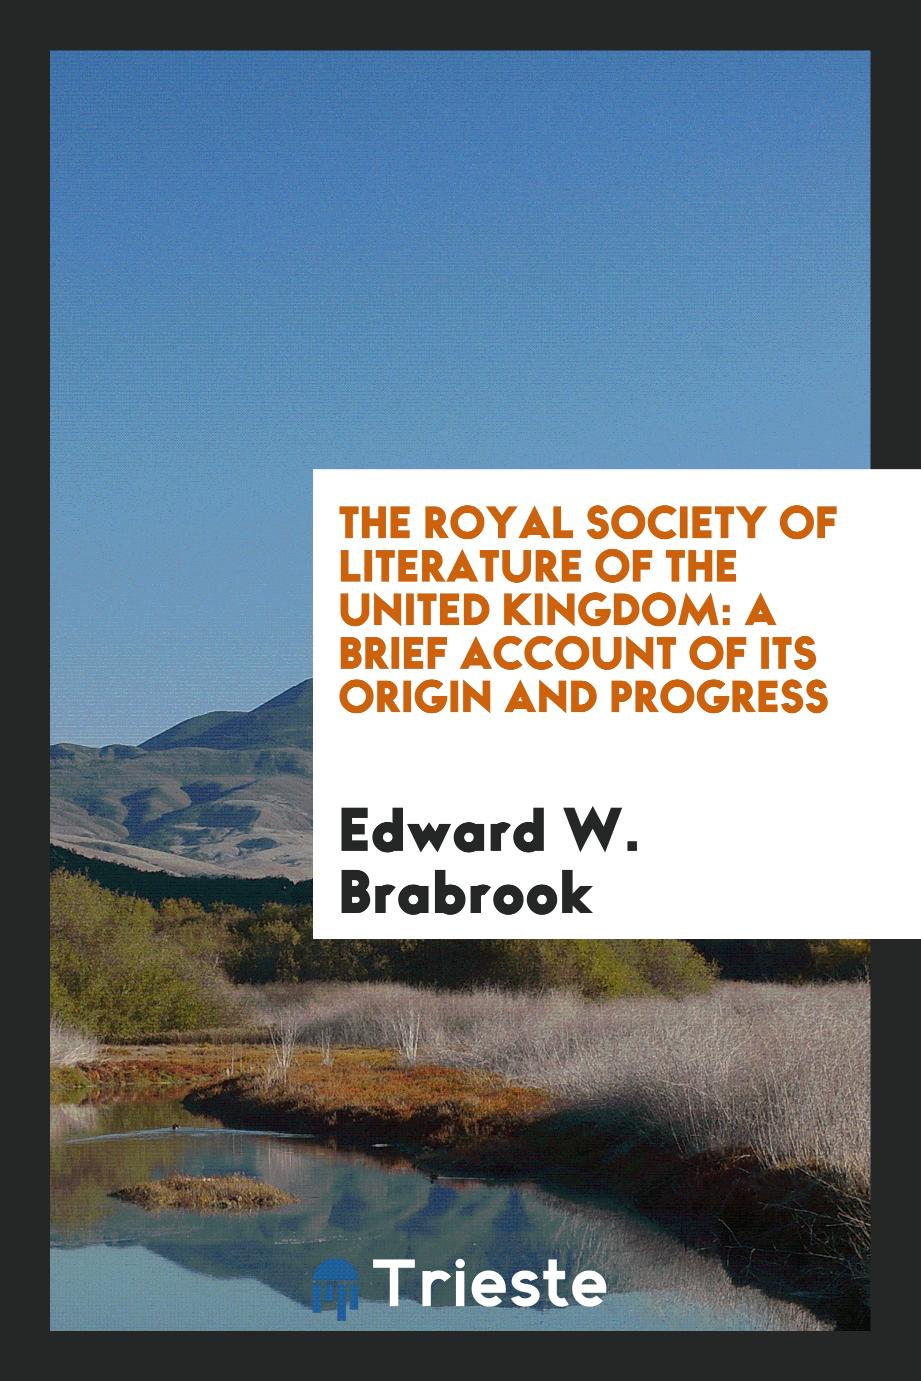 The Royal Society of Literature of the United Kingdom: A Brief Account of Its Origin and Progress